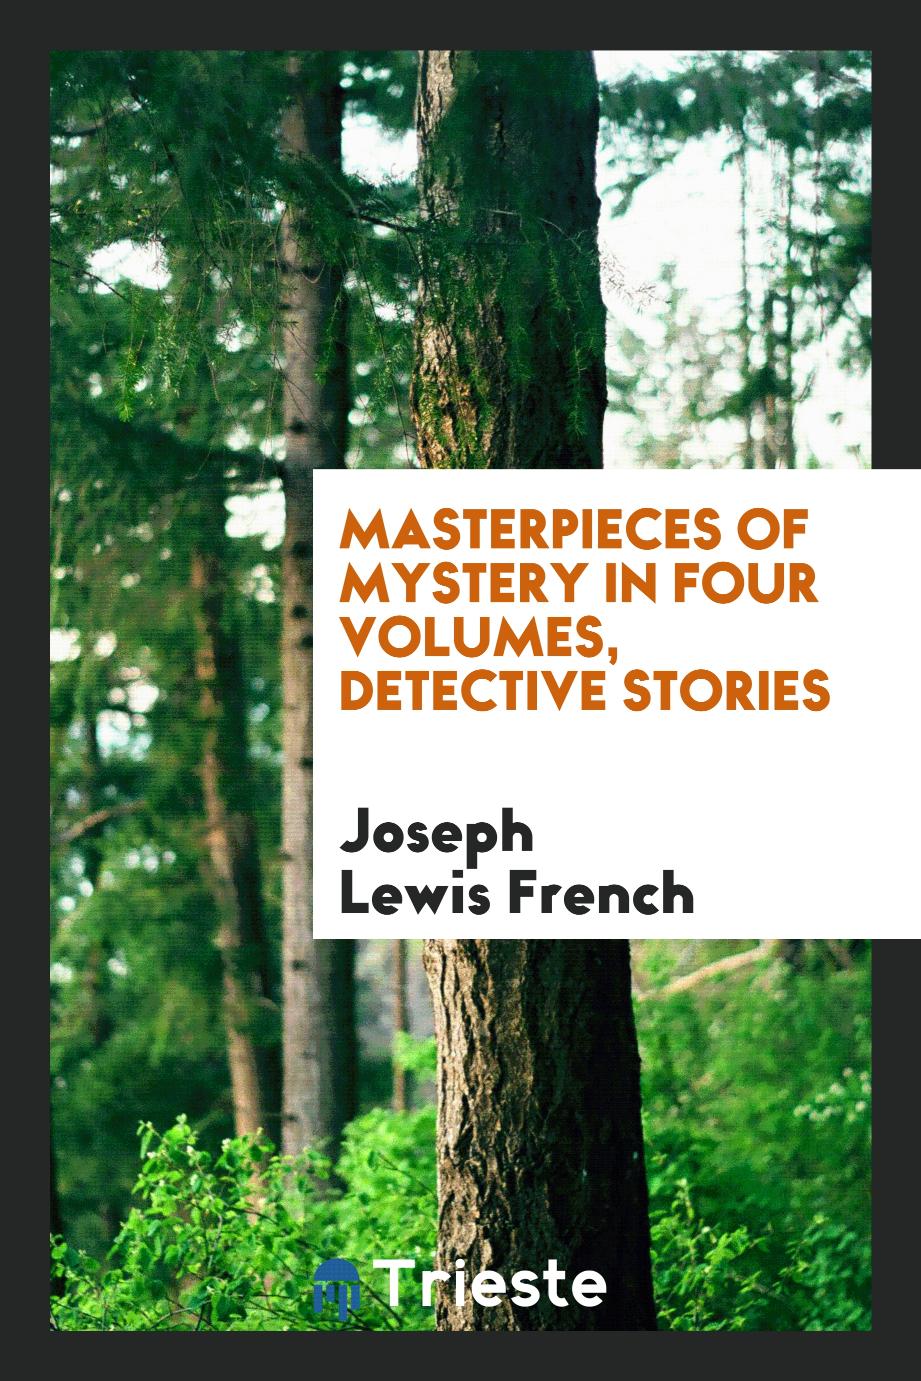 Masterpieces of mystery in four volumes, detective stories